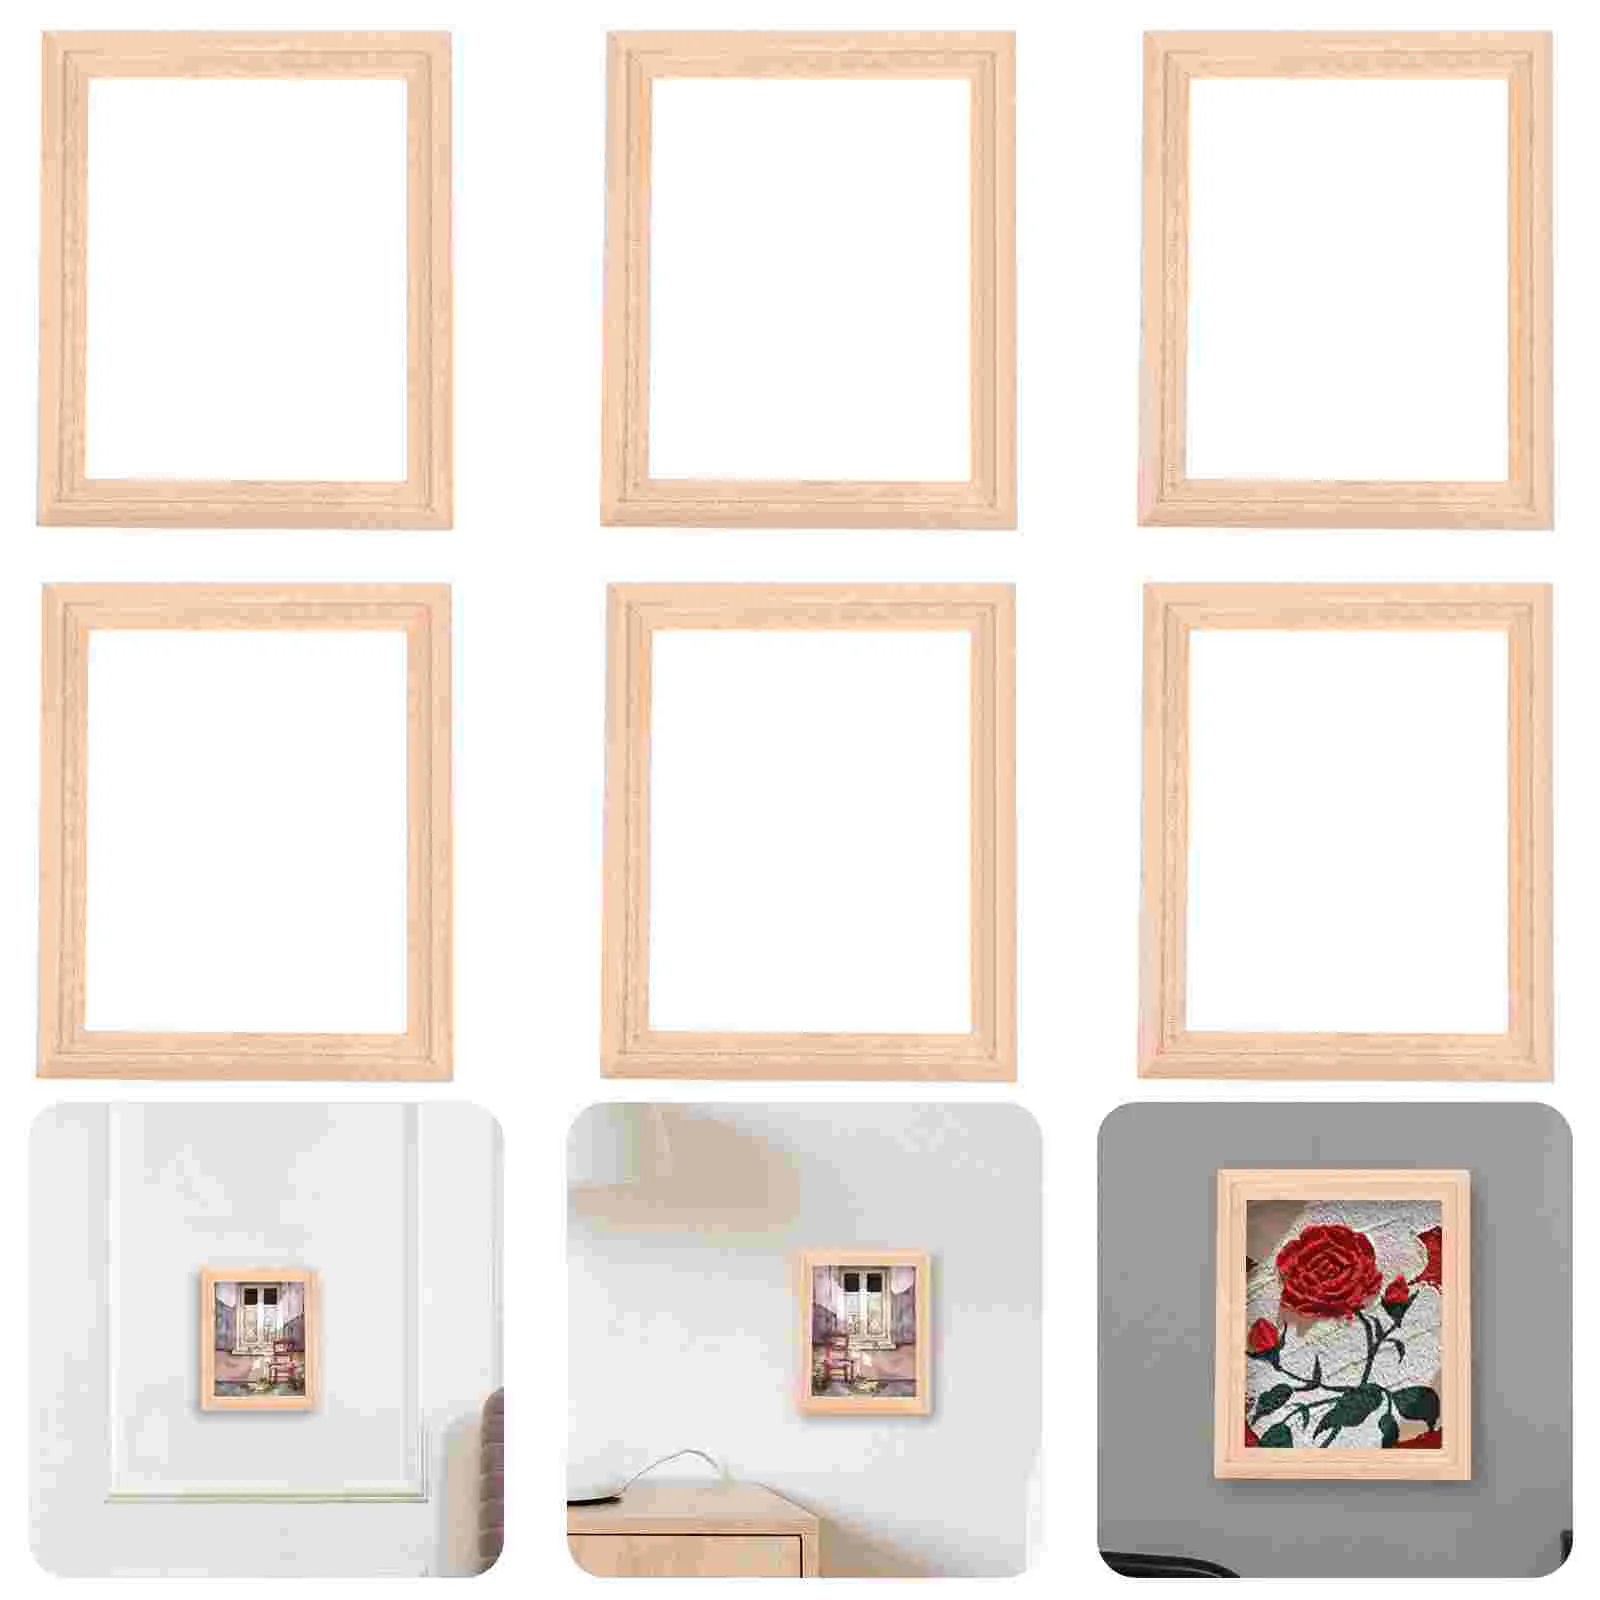 

Frame Dollhouse Photo Kids Mini Toys Wooden Mini House Frames Album Accessories Picture Wood Figurines Wall Micro Ornament